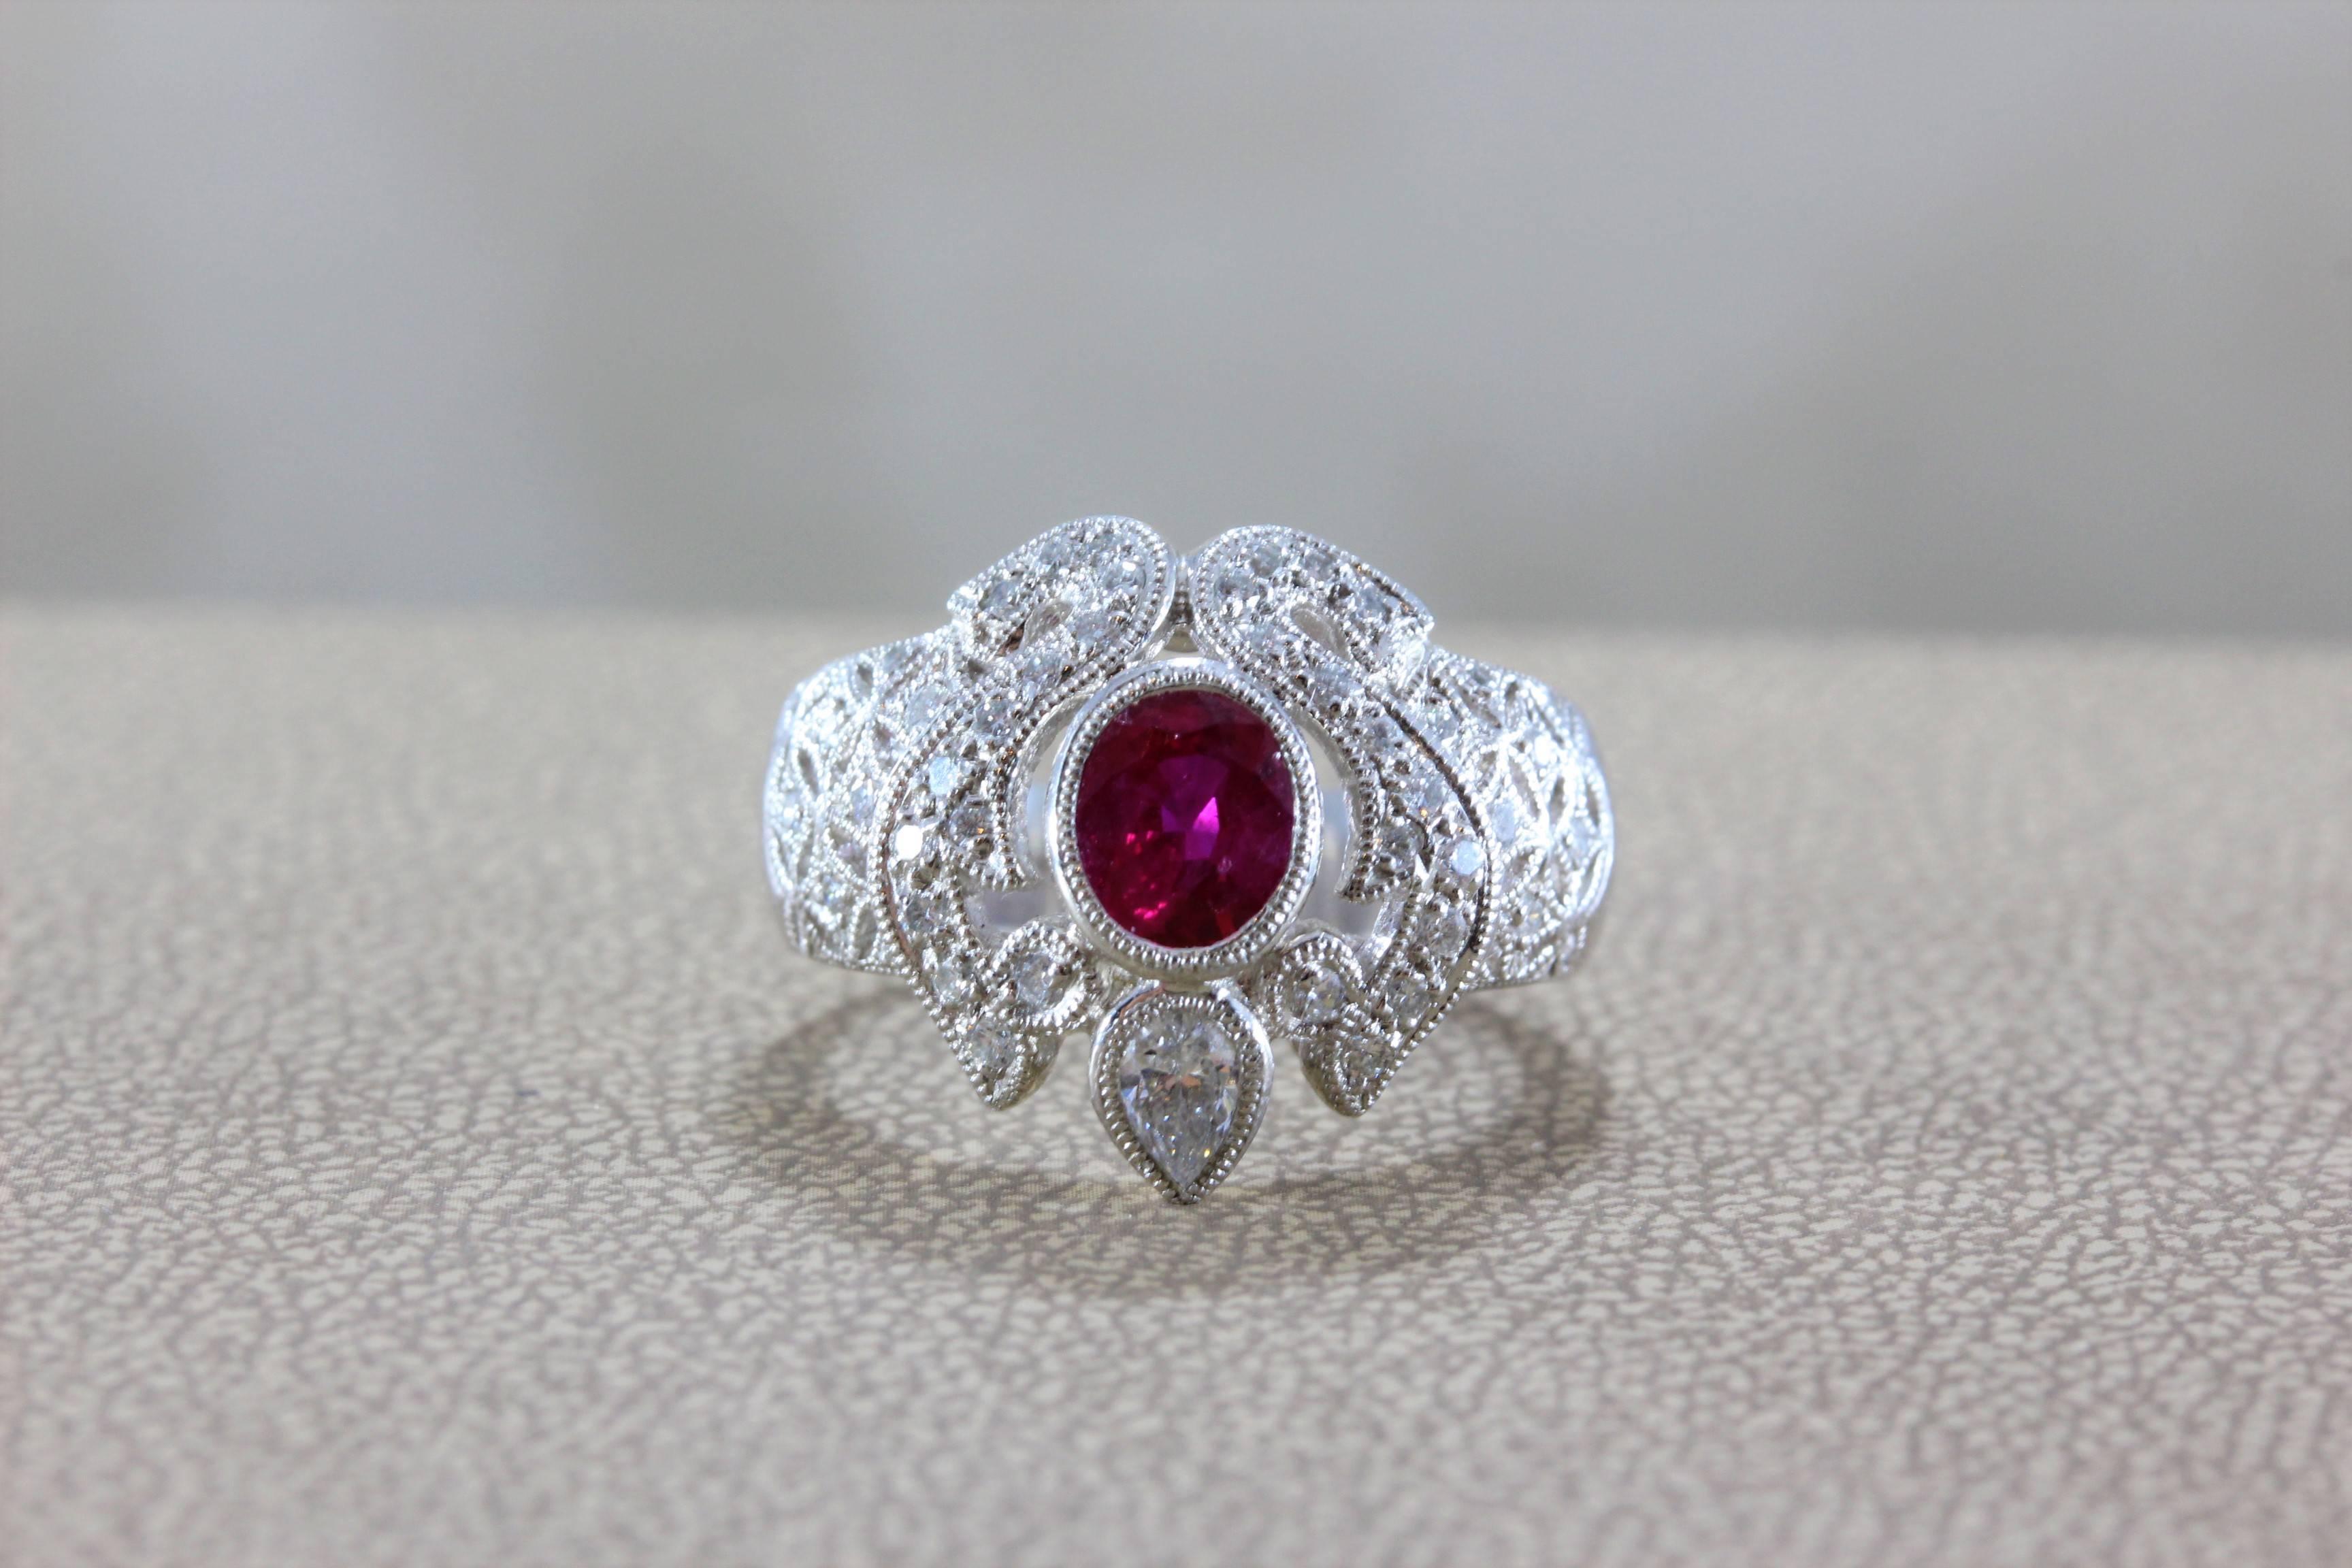 A beautiful platinum ring featuring a vivid red oval shaped ruby, weighing 0.92 carats, which we believe to have a Burmese origin. A larger pear shape diamond along with rounds accent the center stone, set in platinum with milgrain settings. 

Size